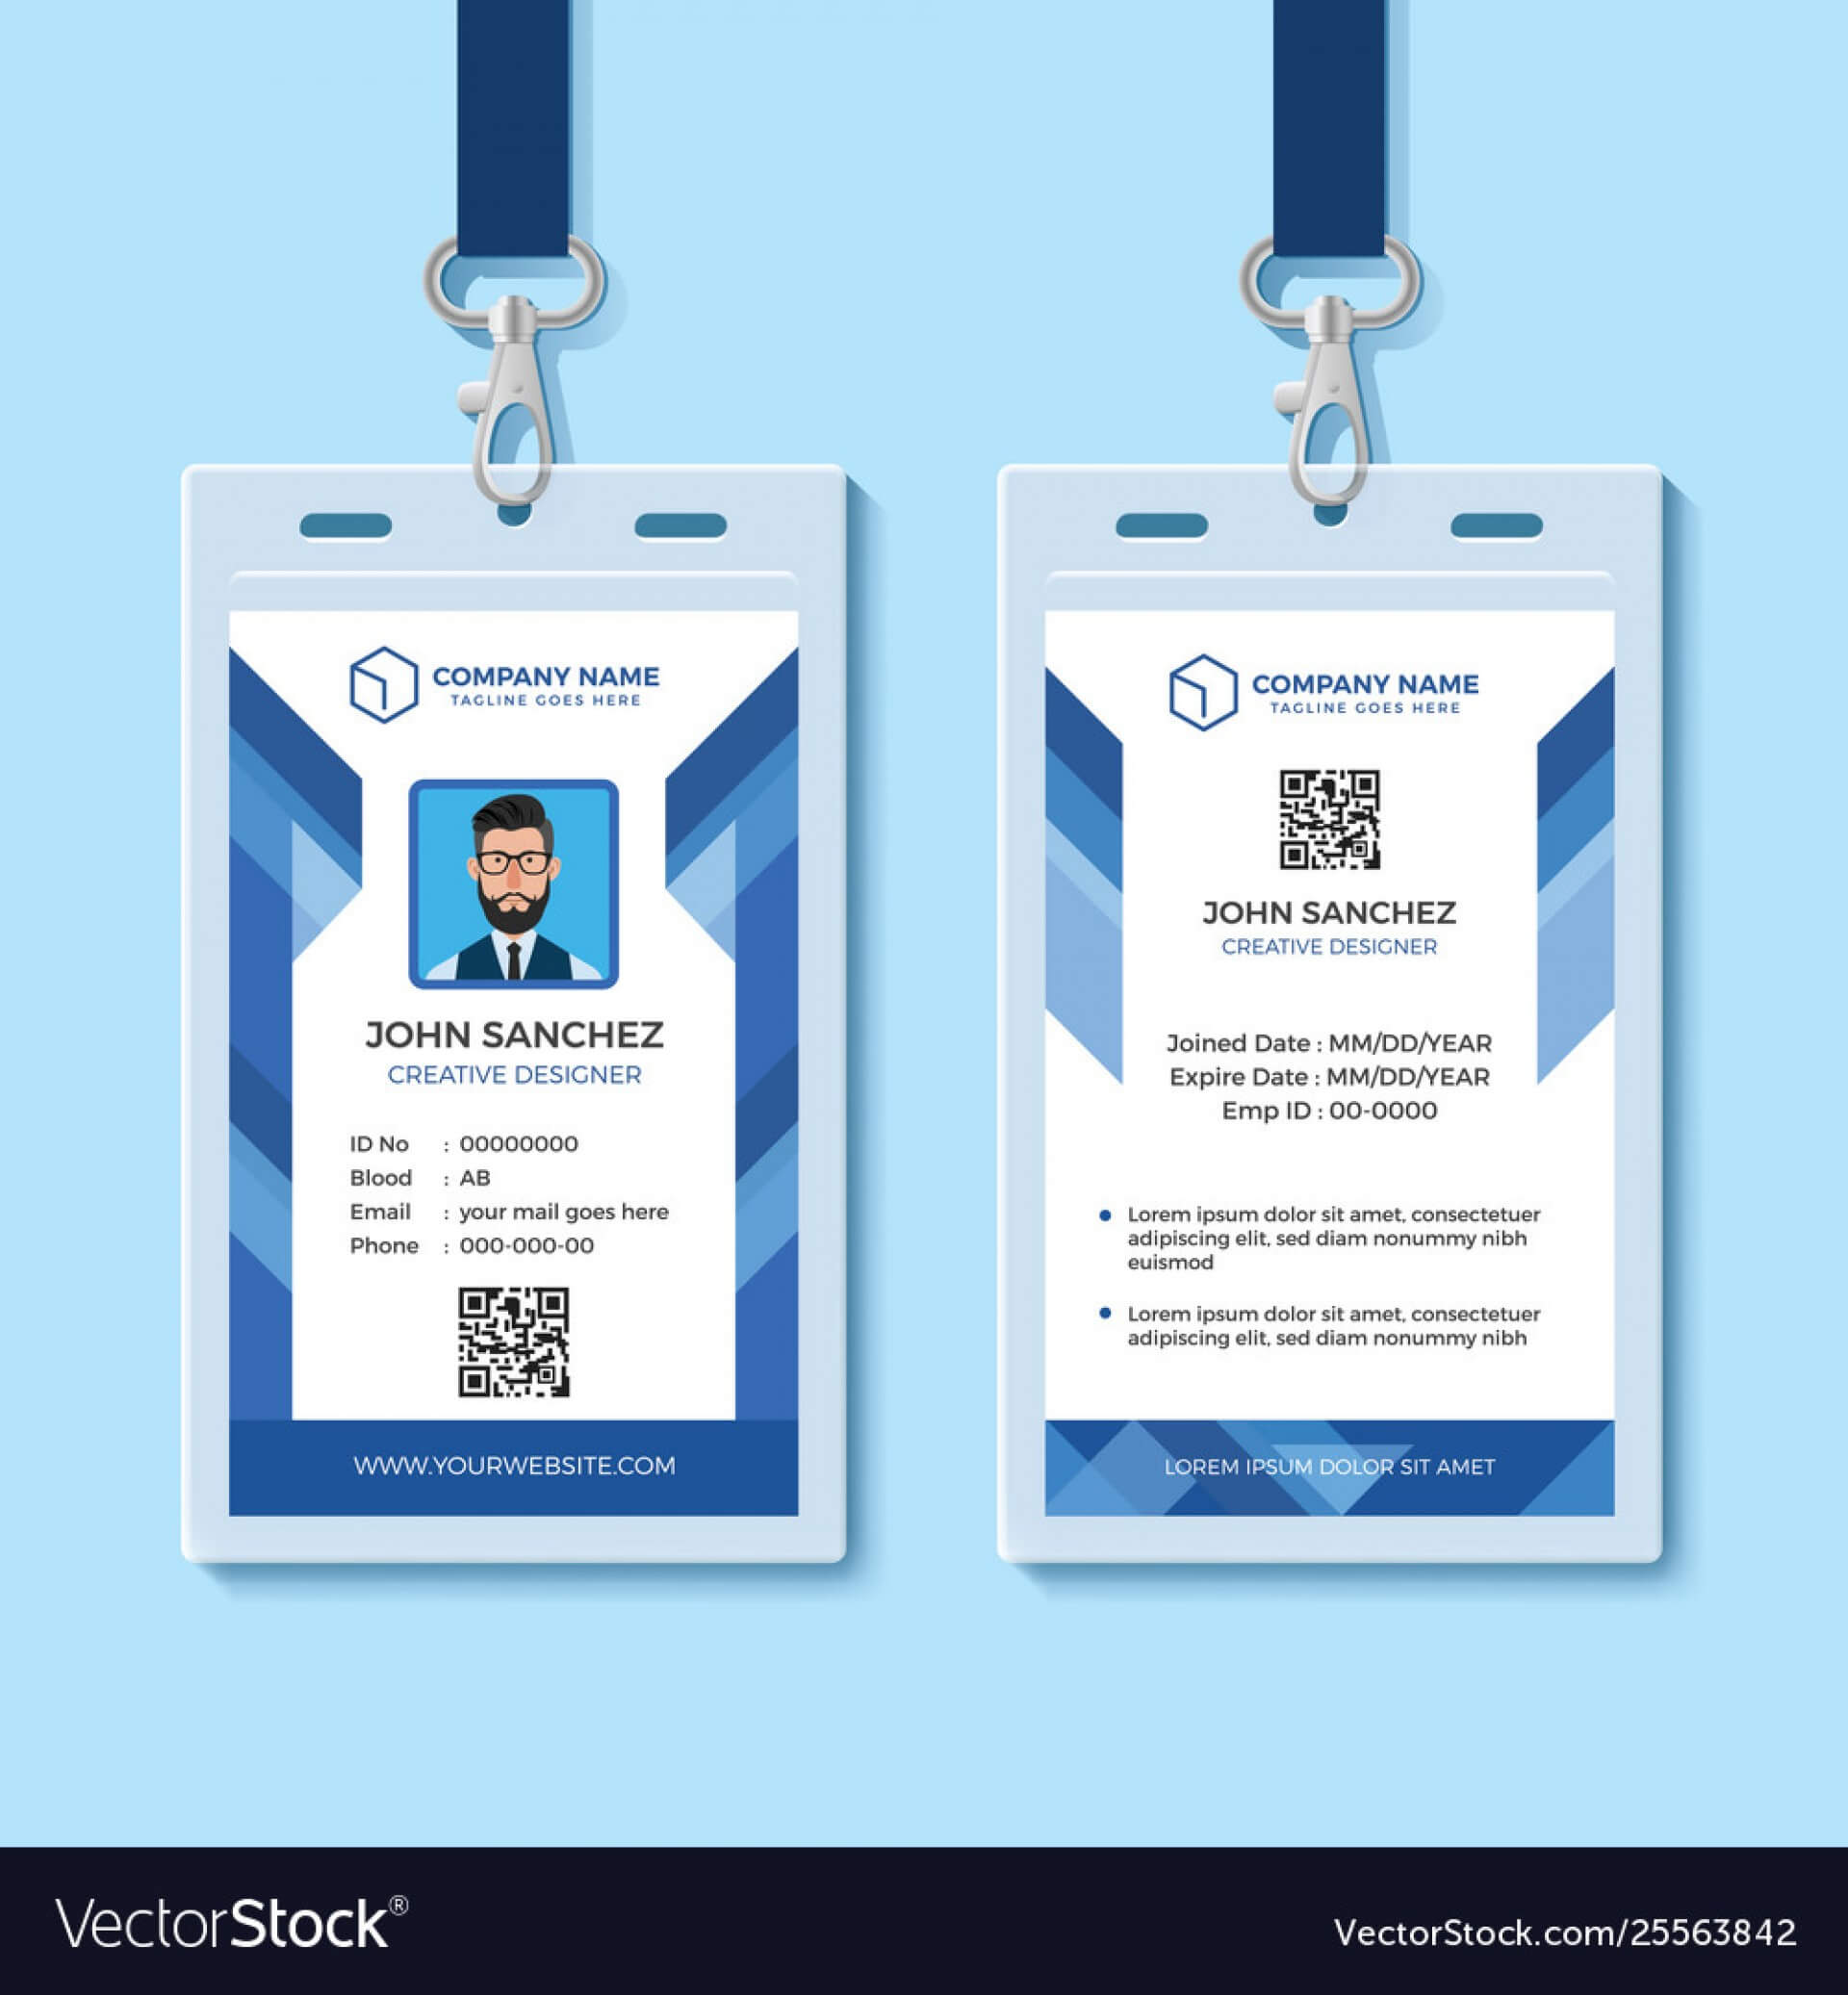 025 Template Ideas Employee Id Card Templates Blue Design Pertaining To Id Card Template Word Free